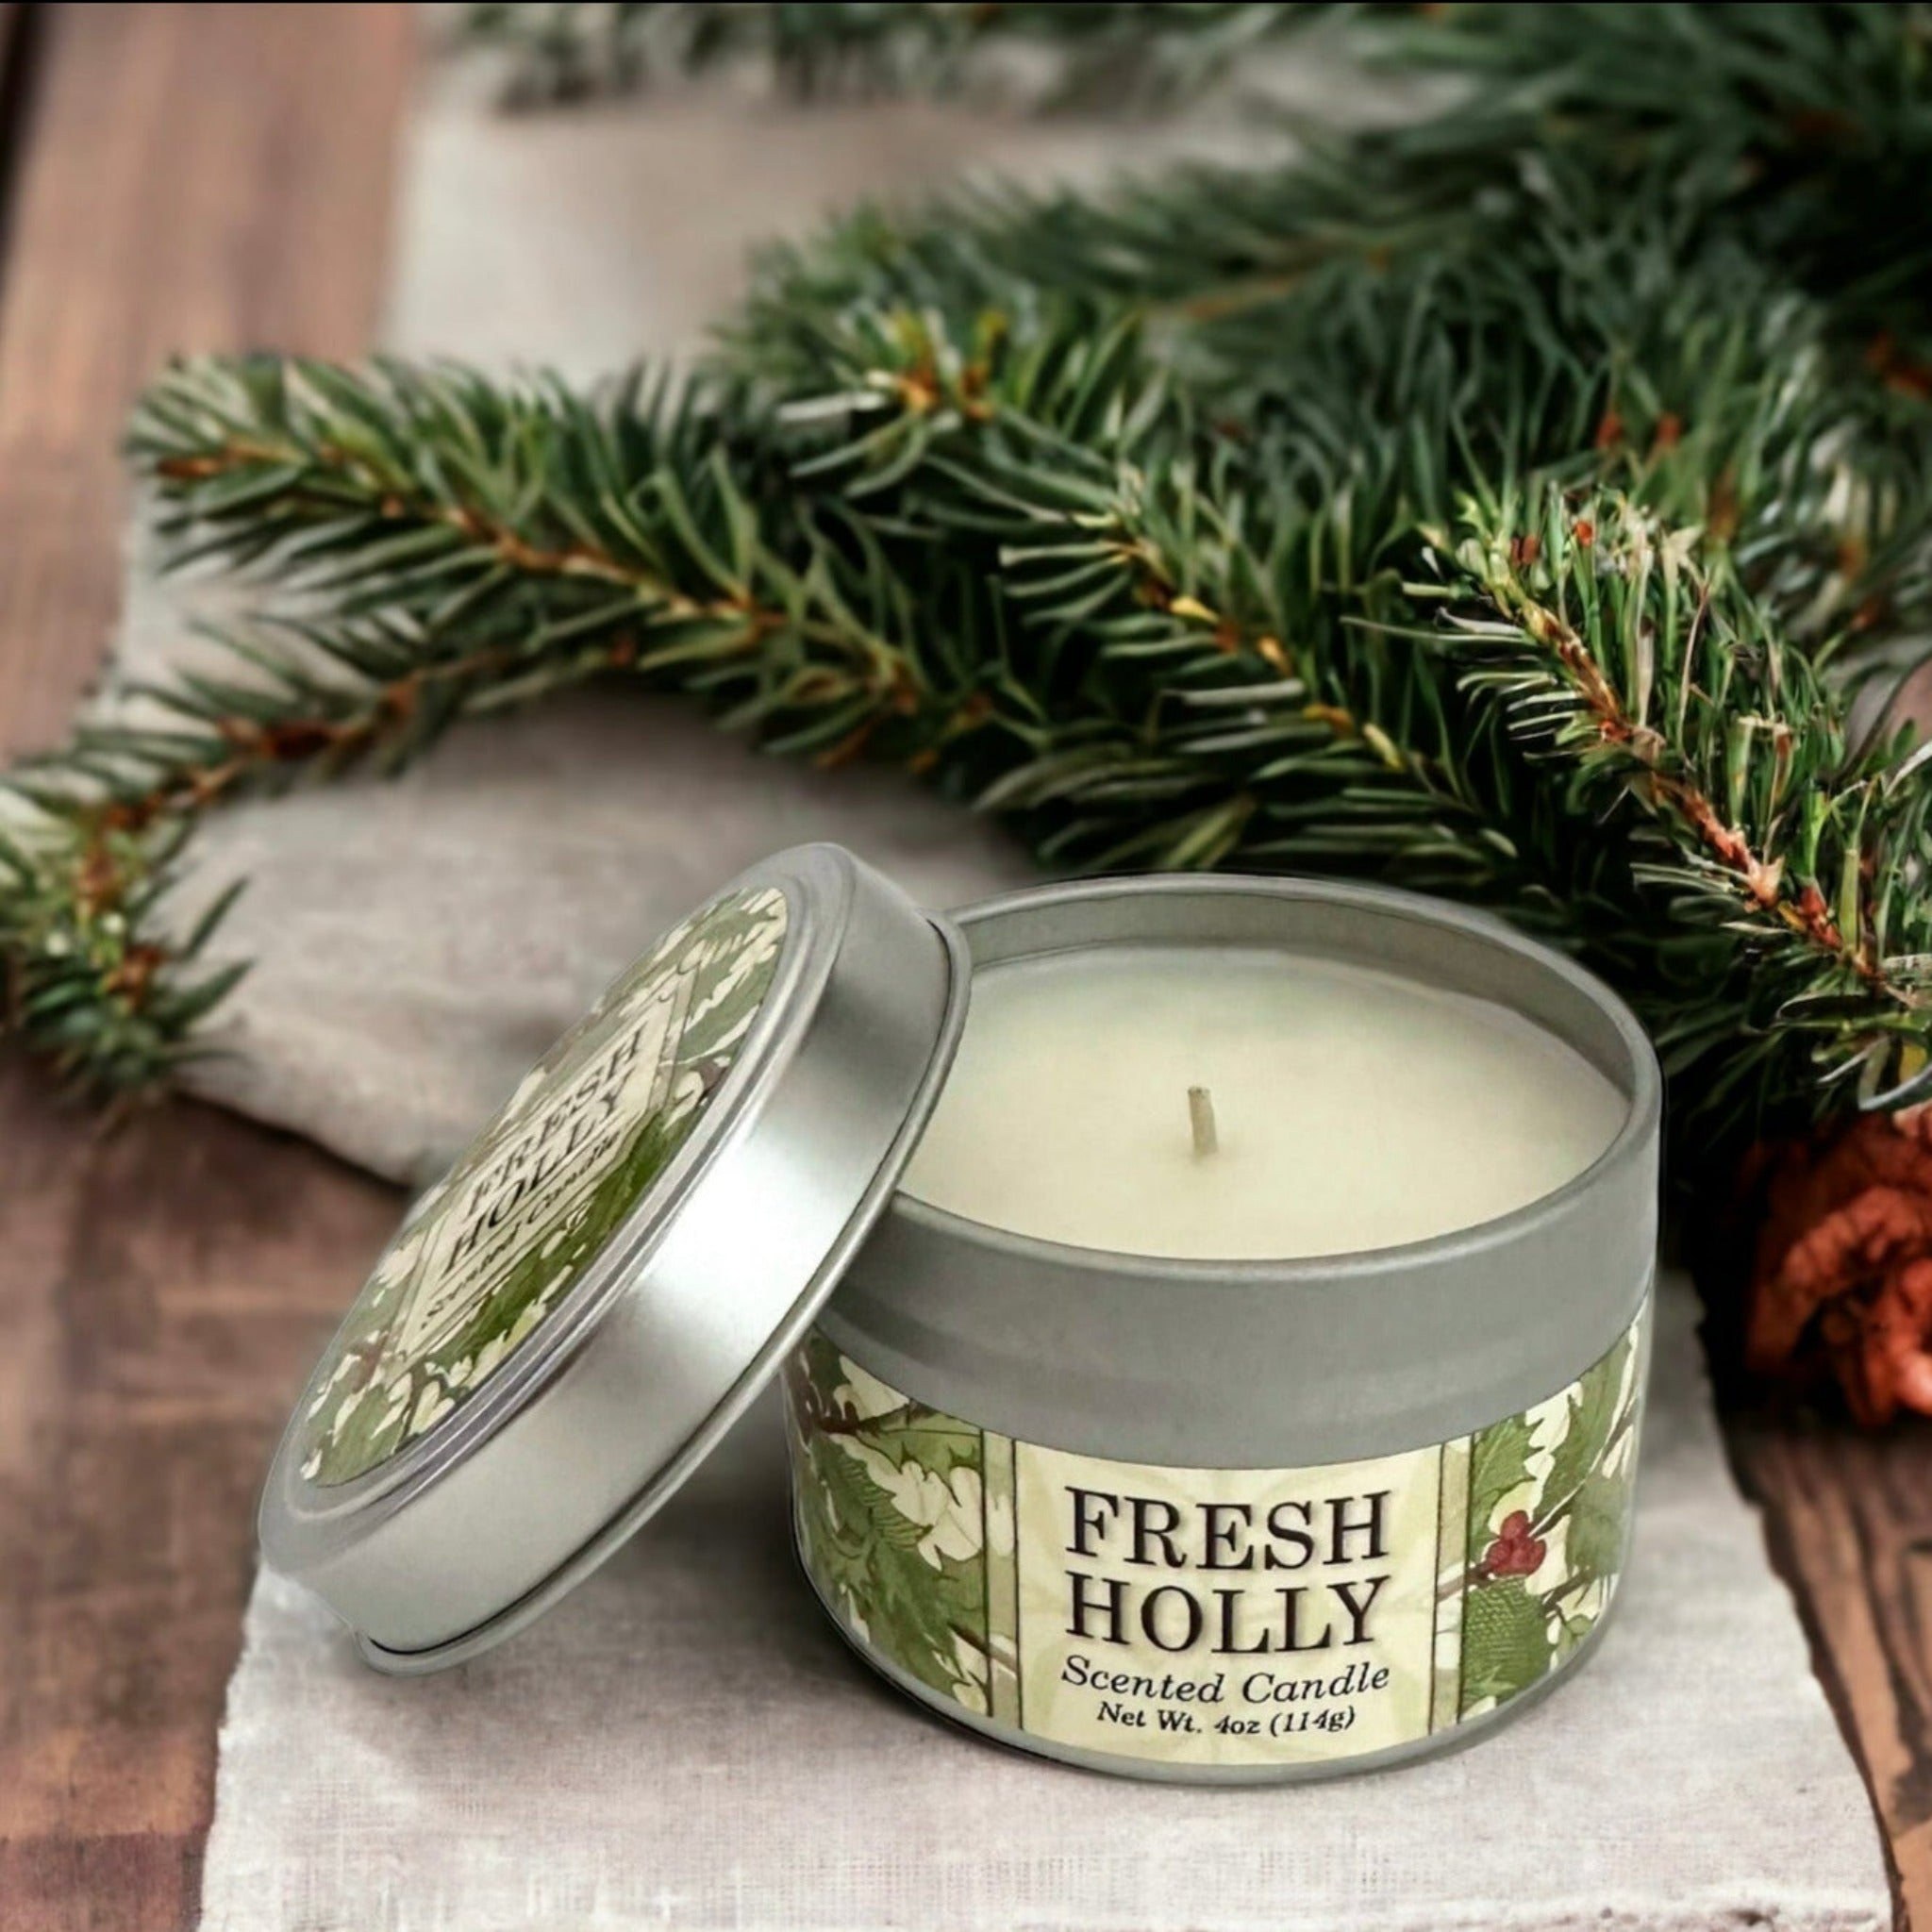 Greenwich Bay Trading Company Fresh Holly Candle